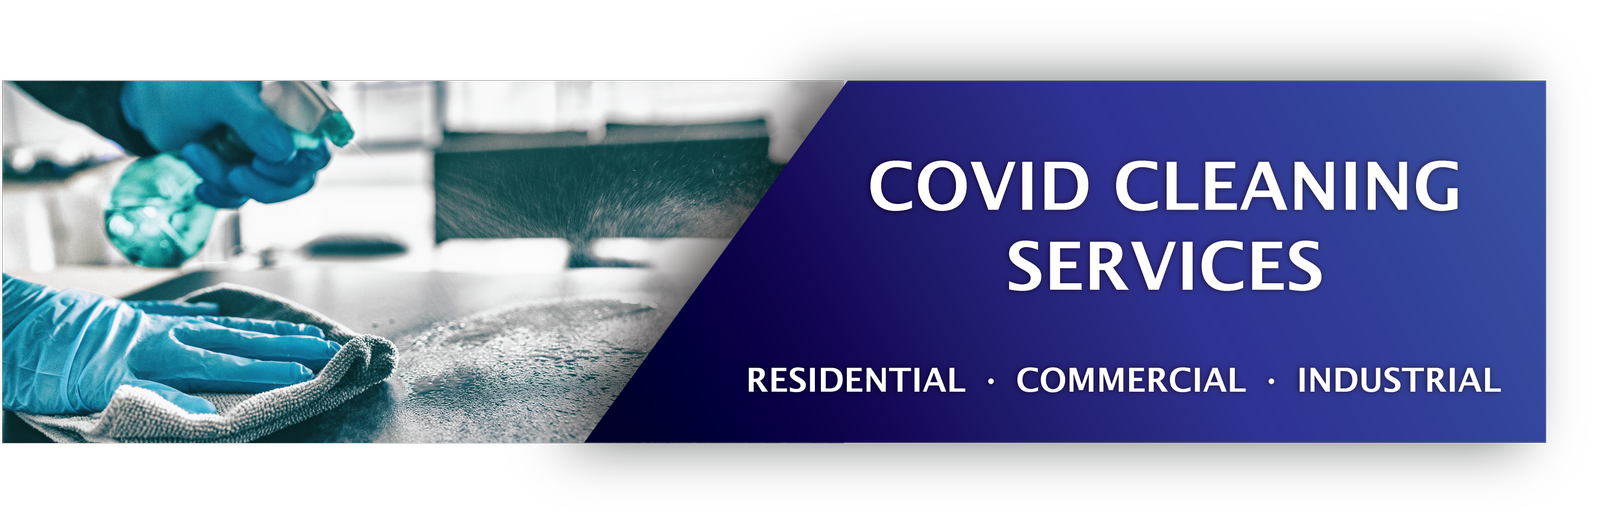 COVID Cleaning Services